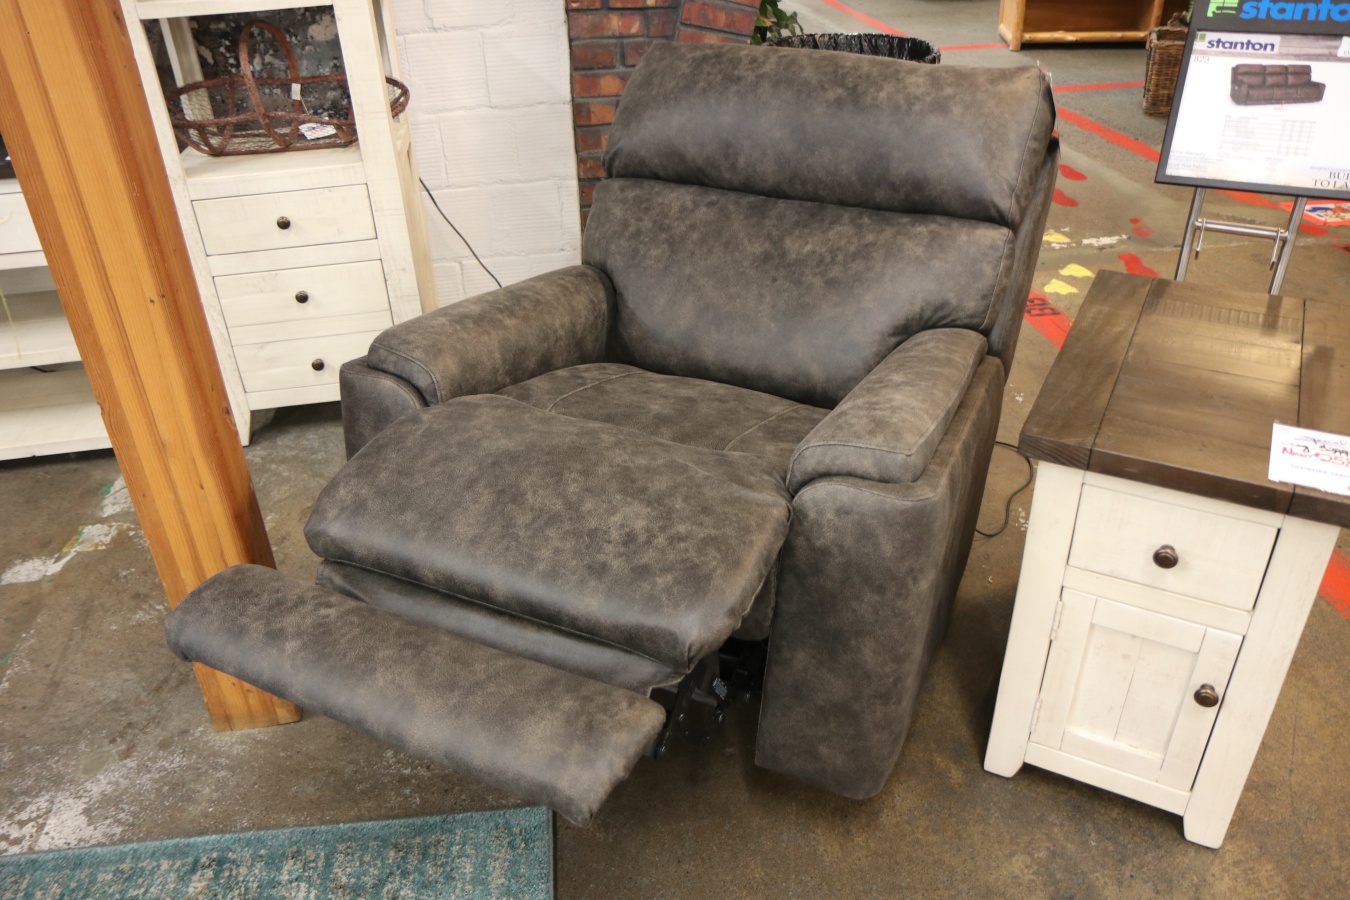 Spectral Cappuccino Power Recliner